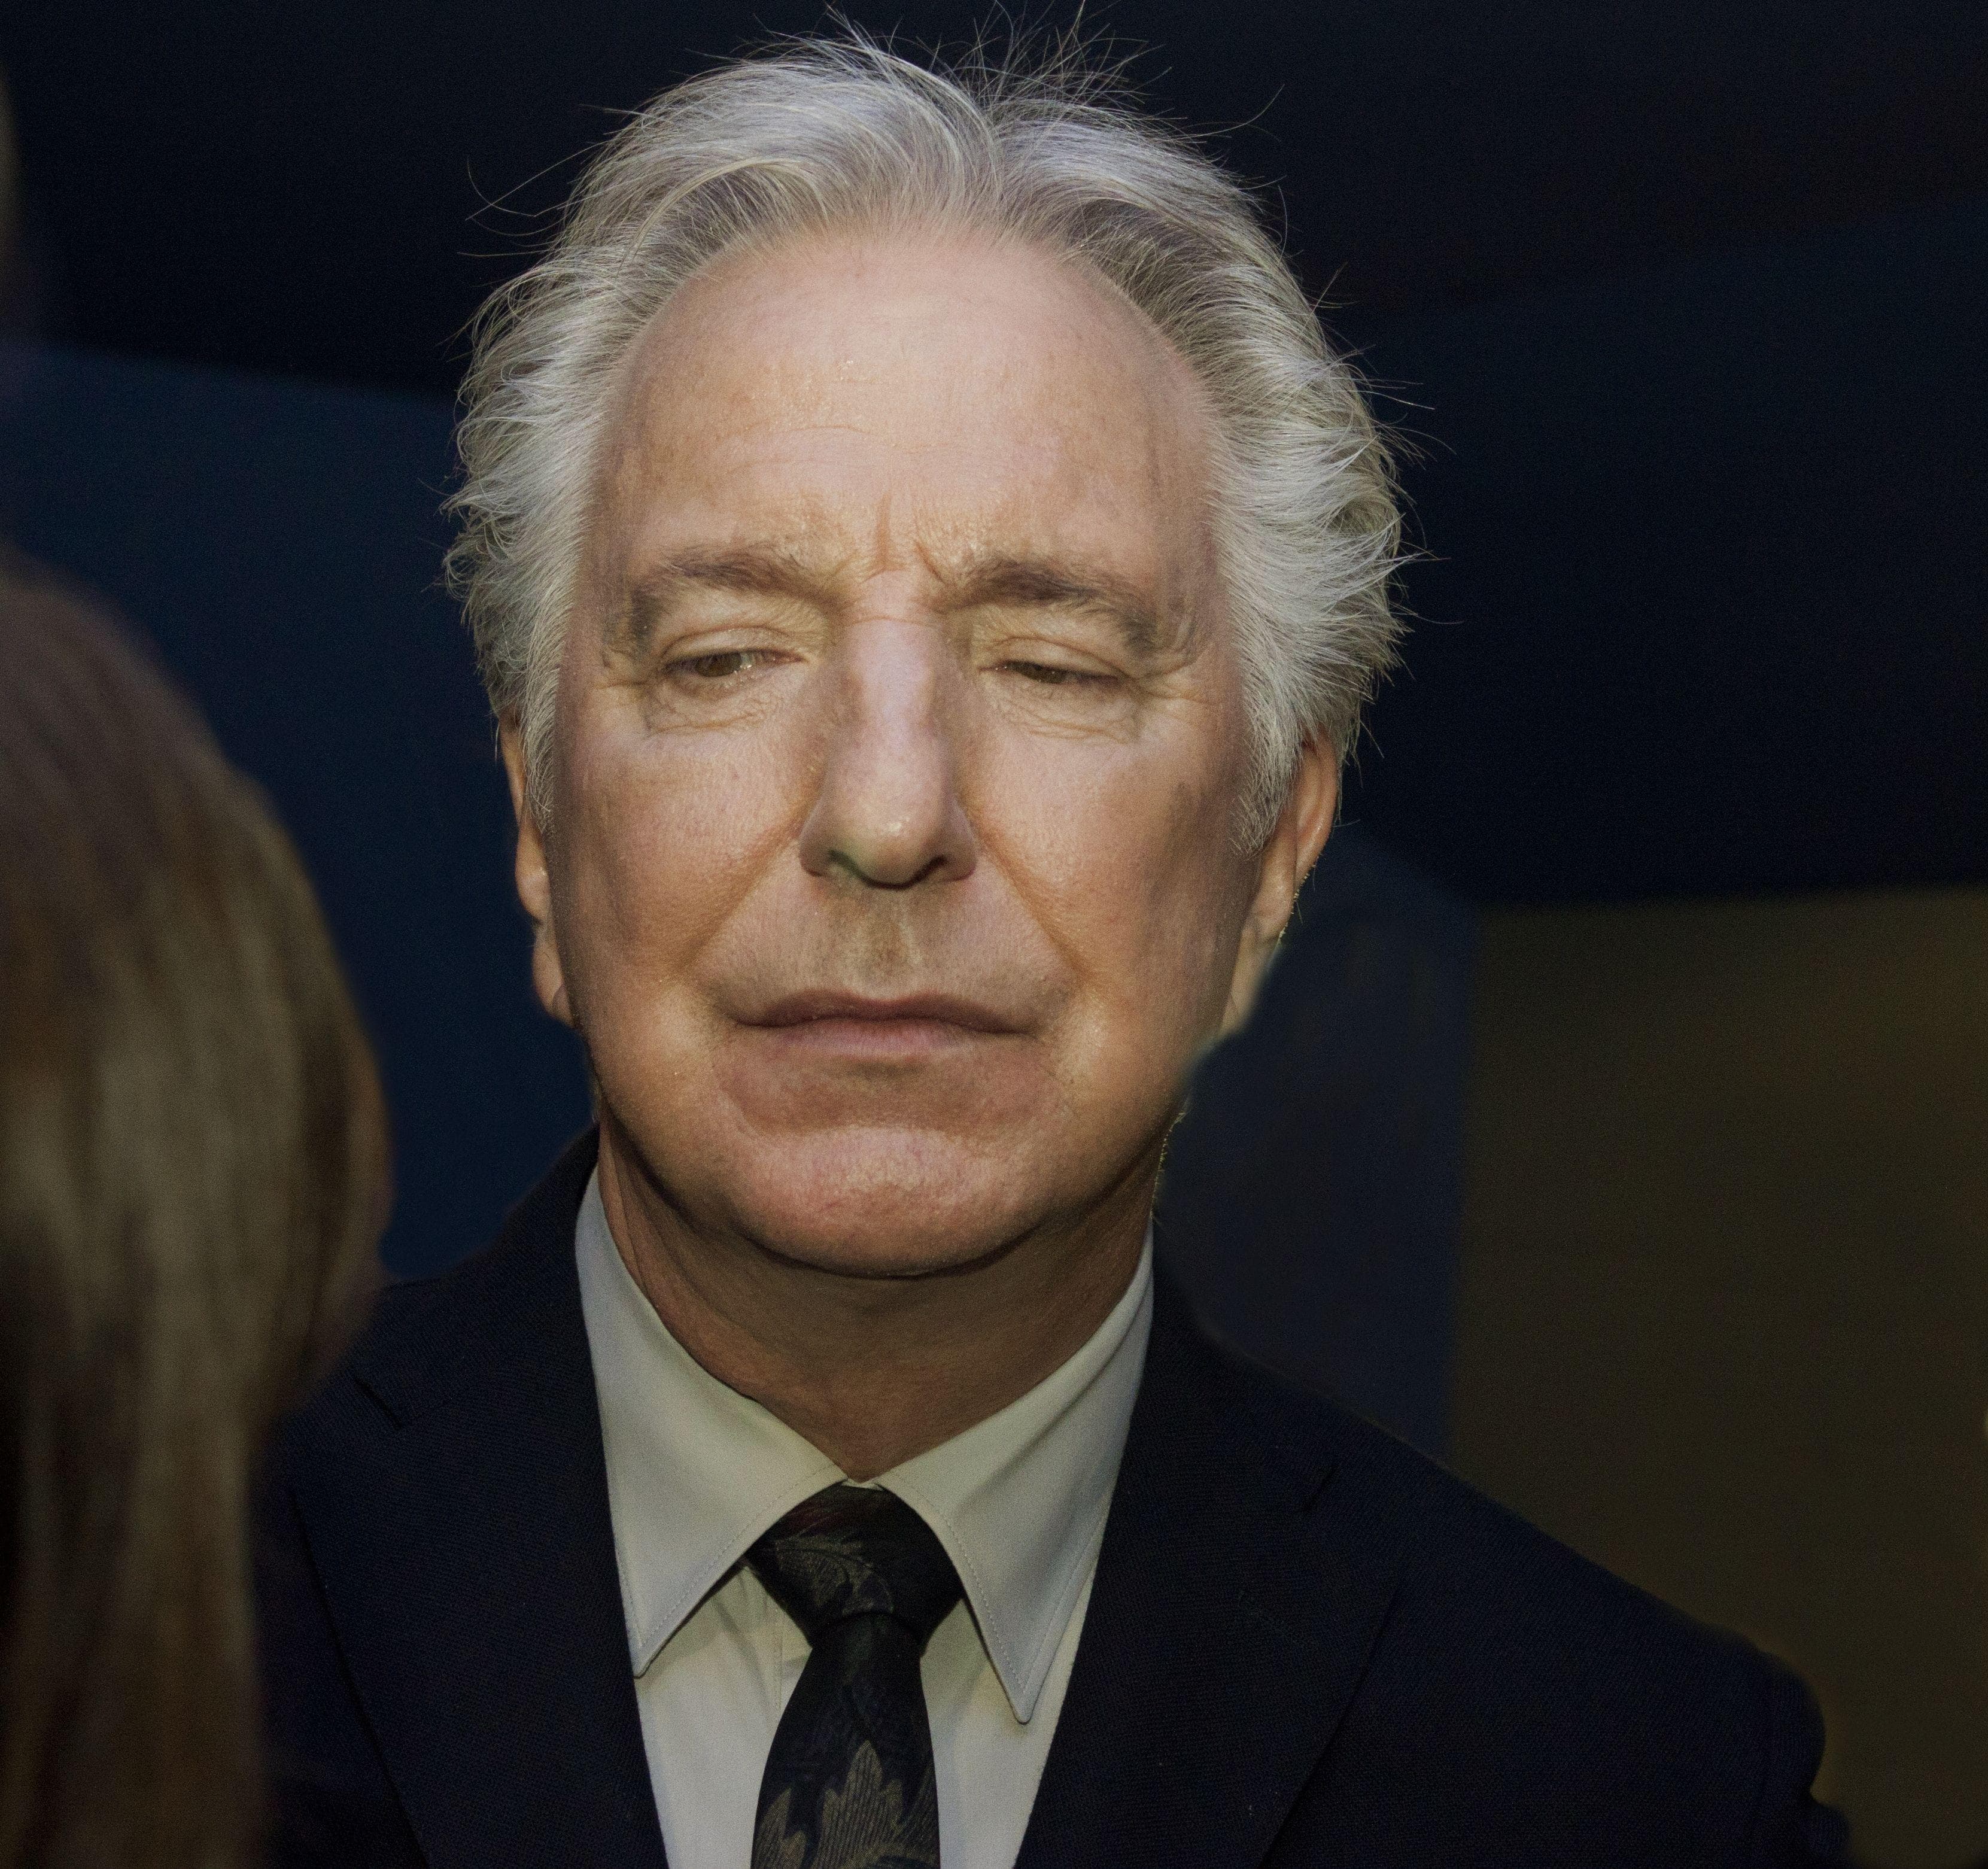 Random Delightful Stories About Alan Rickman From Other Actors And Crew On Set